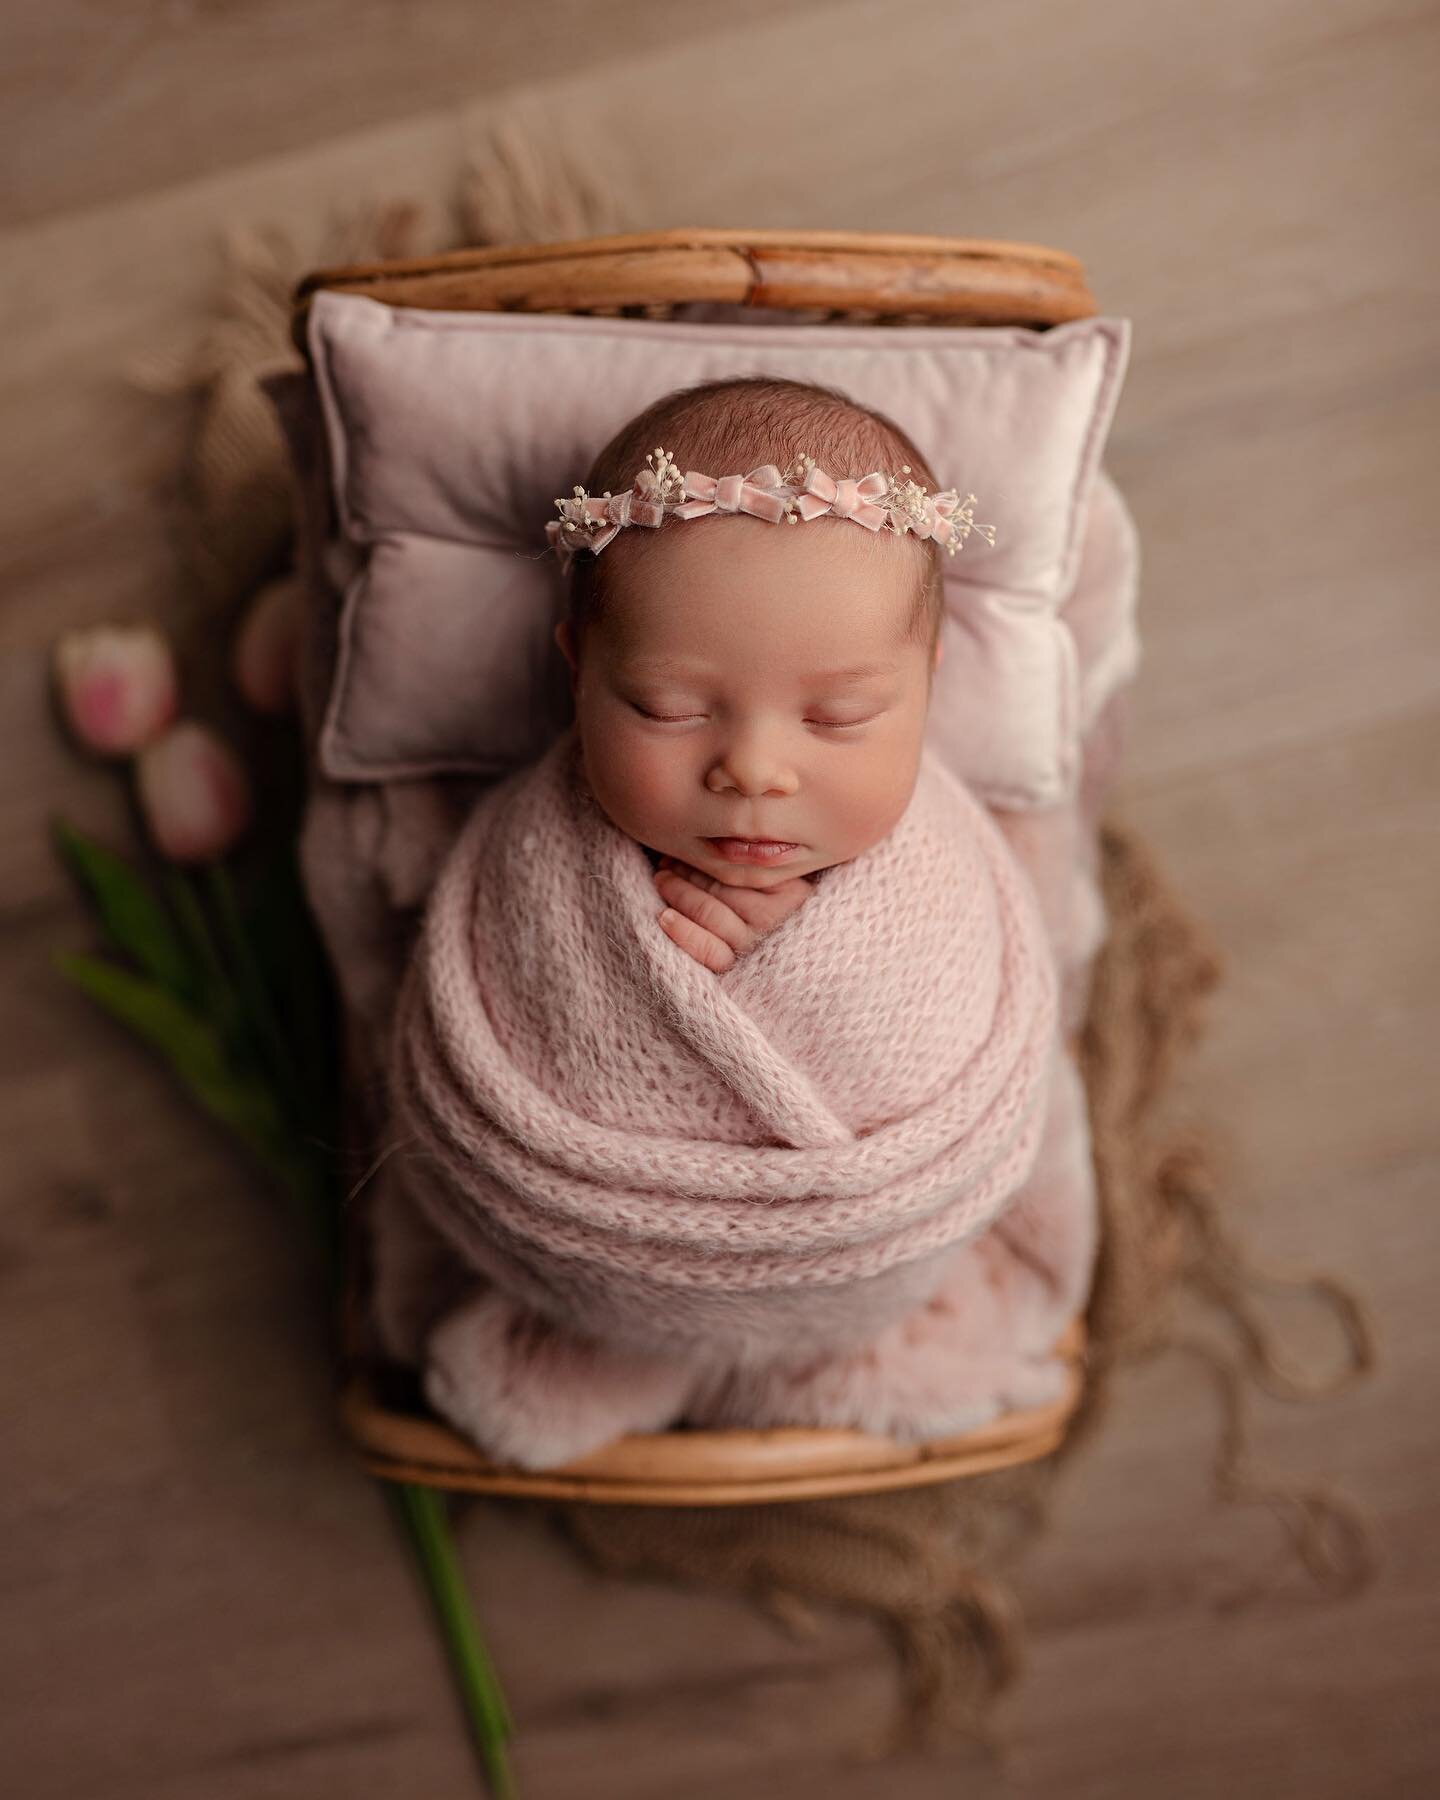 Baby Elira - Pretty in Pink 💕 How gorgeous is this little love nugget?! 

Currently booking Newborn Portrait Sessions for Due Dates through August! September Due Dates open for booking on April 1st! Only 10 Due Dates are accepted per Calendar Month!